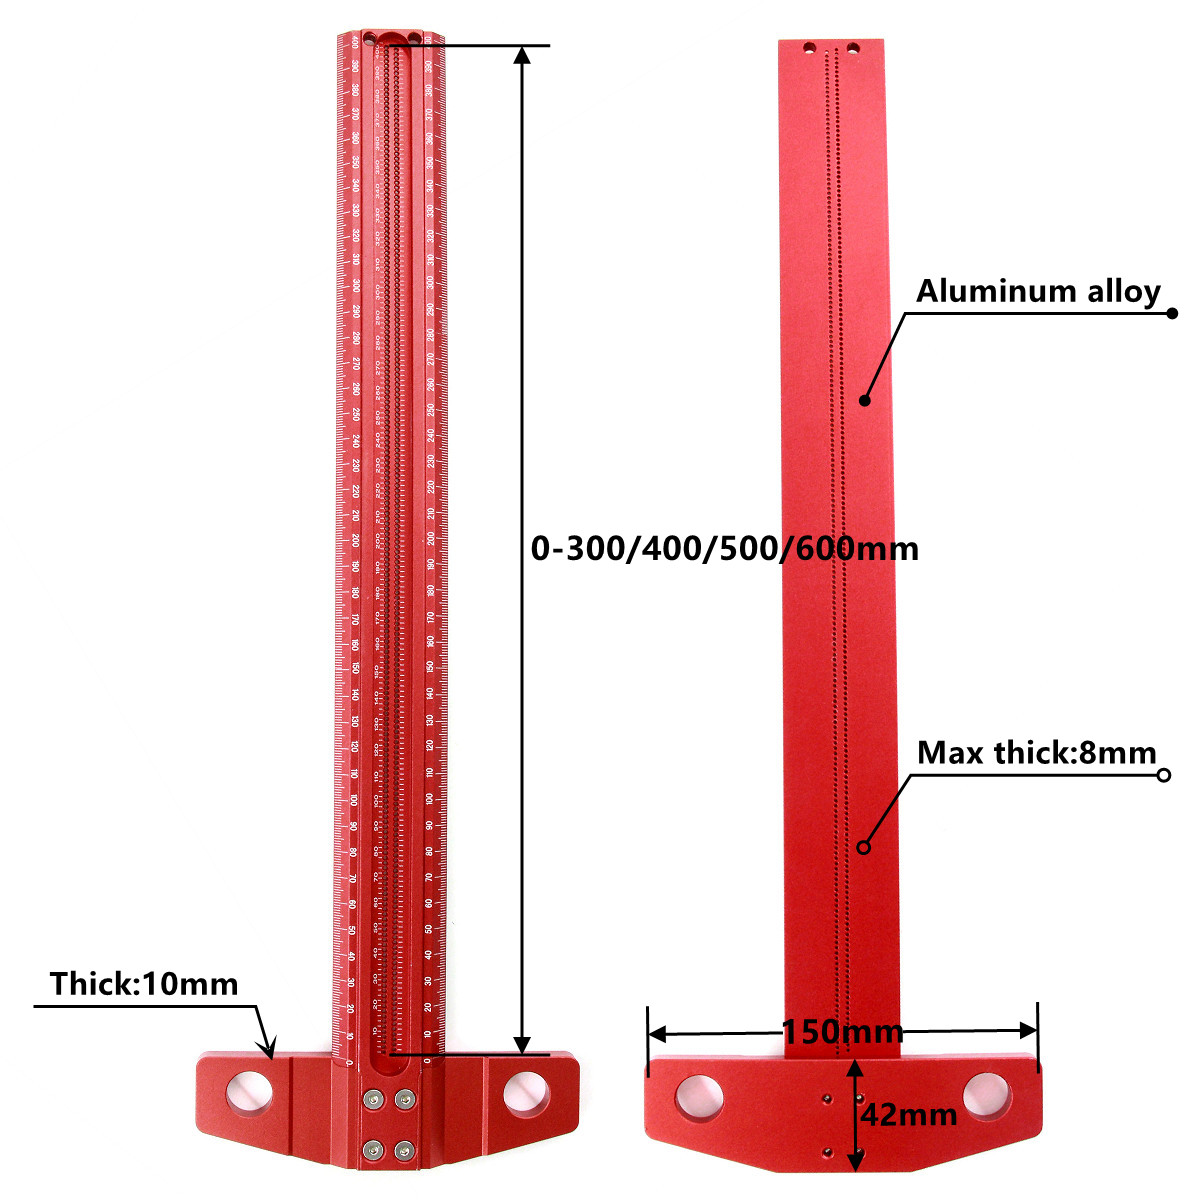 Aluminum-Alloy-Precision-Marking-Ruler-Woodworking-Multifunctional-Scale-Ruler-Hole-Ruler-Woodworkin-1848019-8